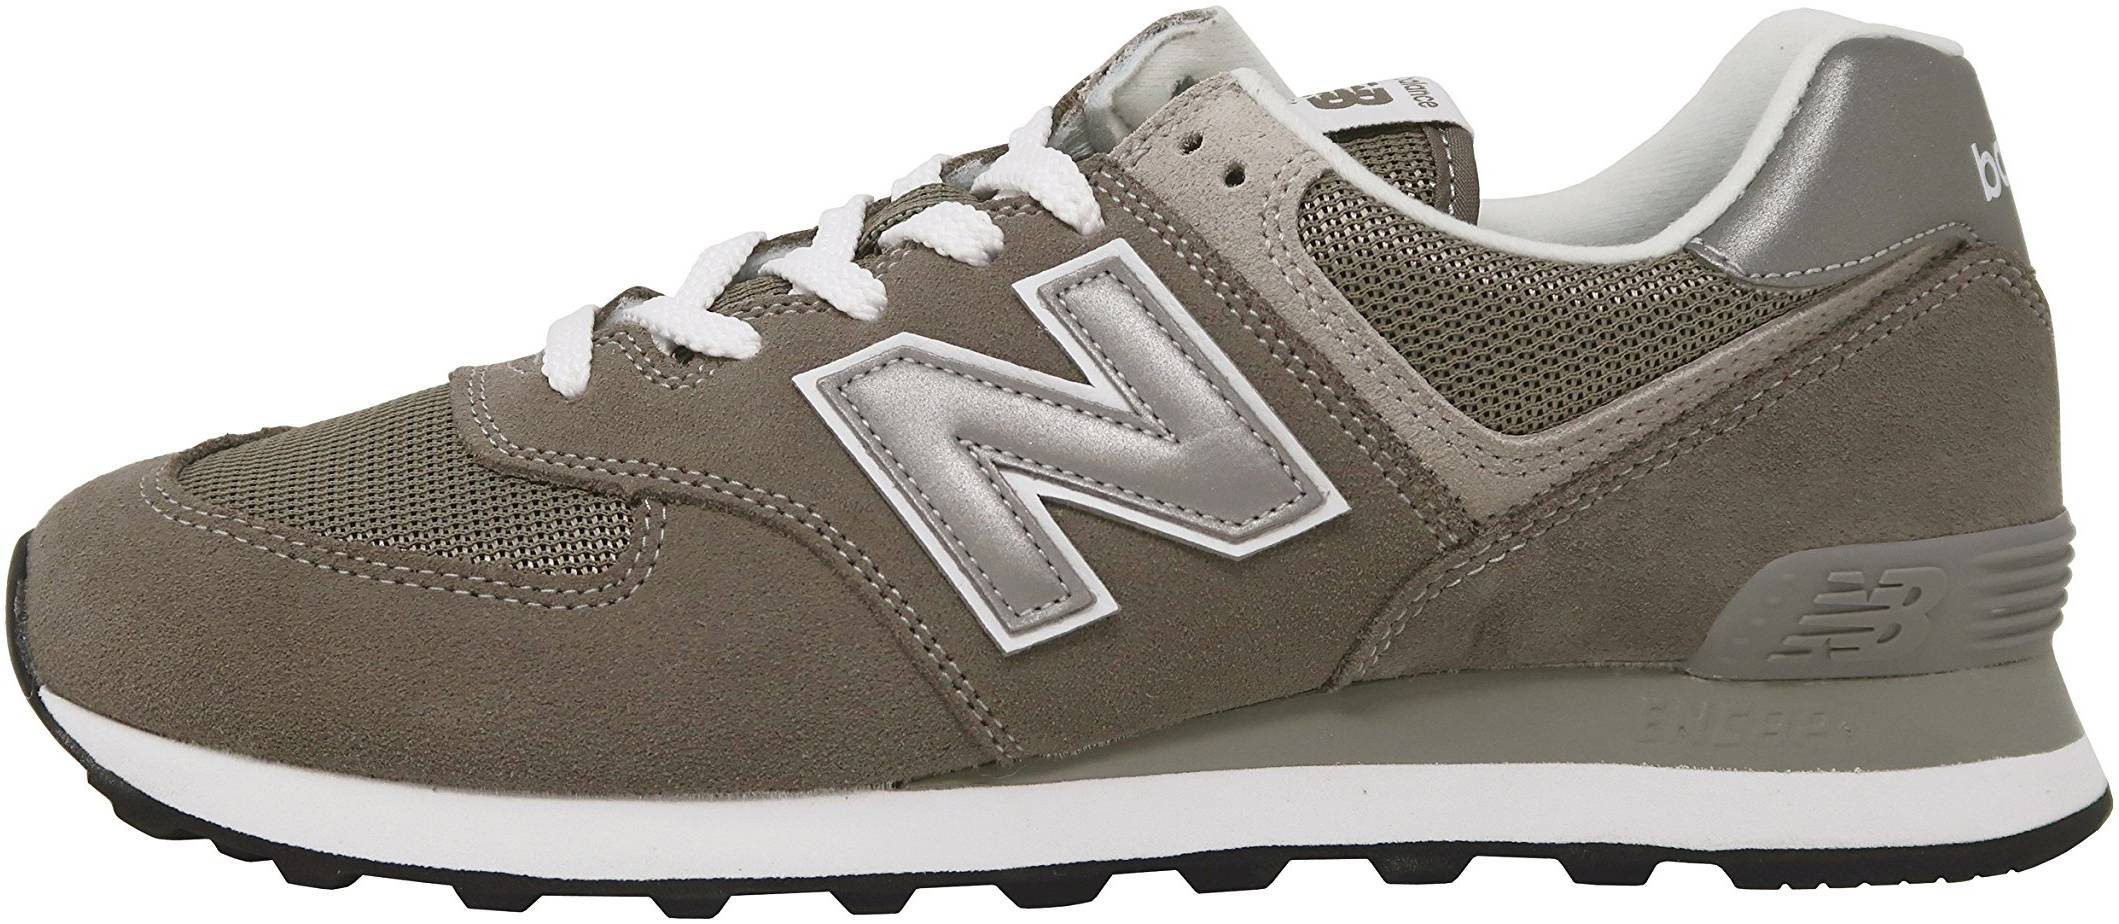 New Balance 574 sneakers in 7 colors (only $48) | RunRepeat